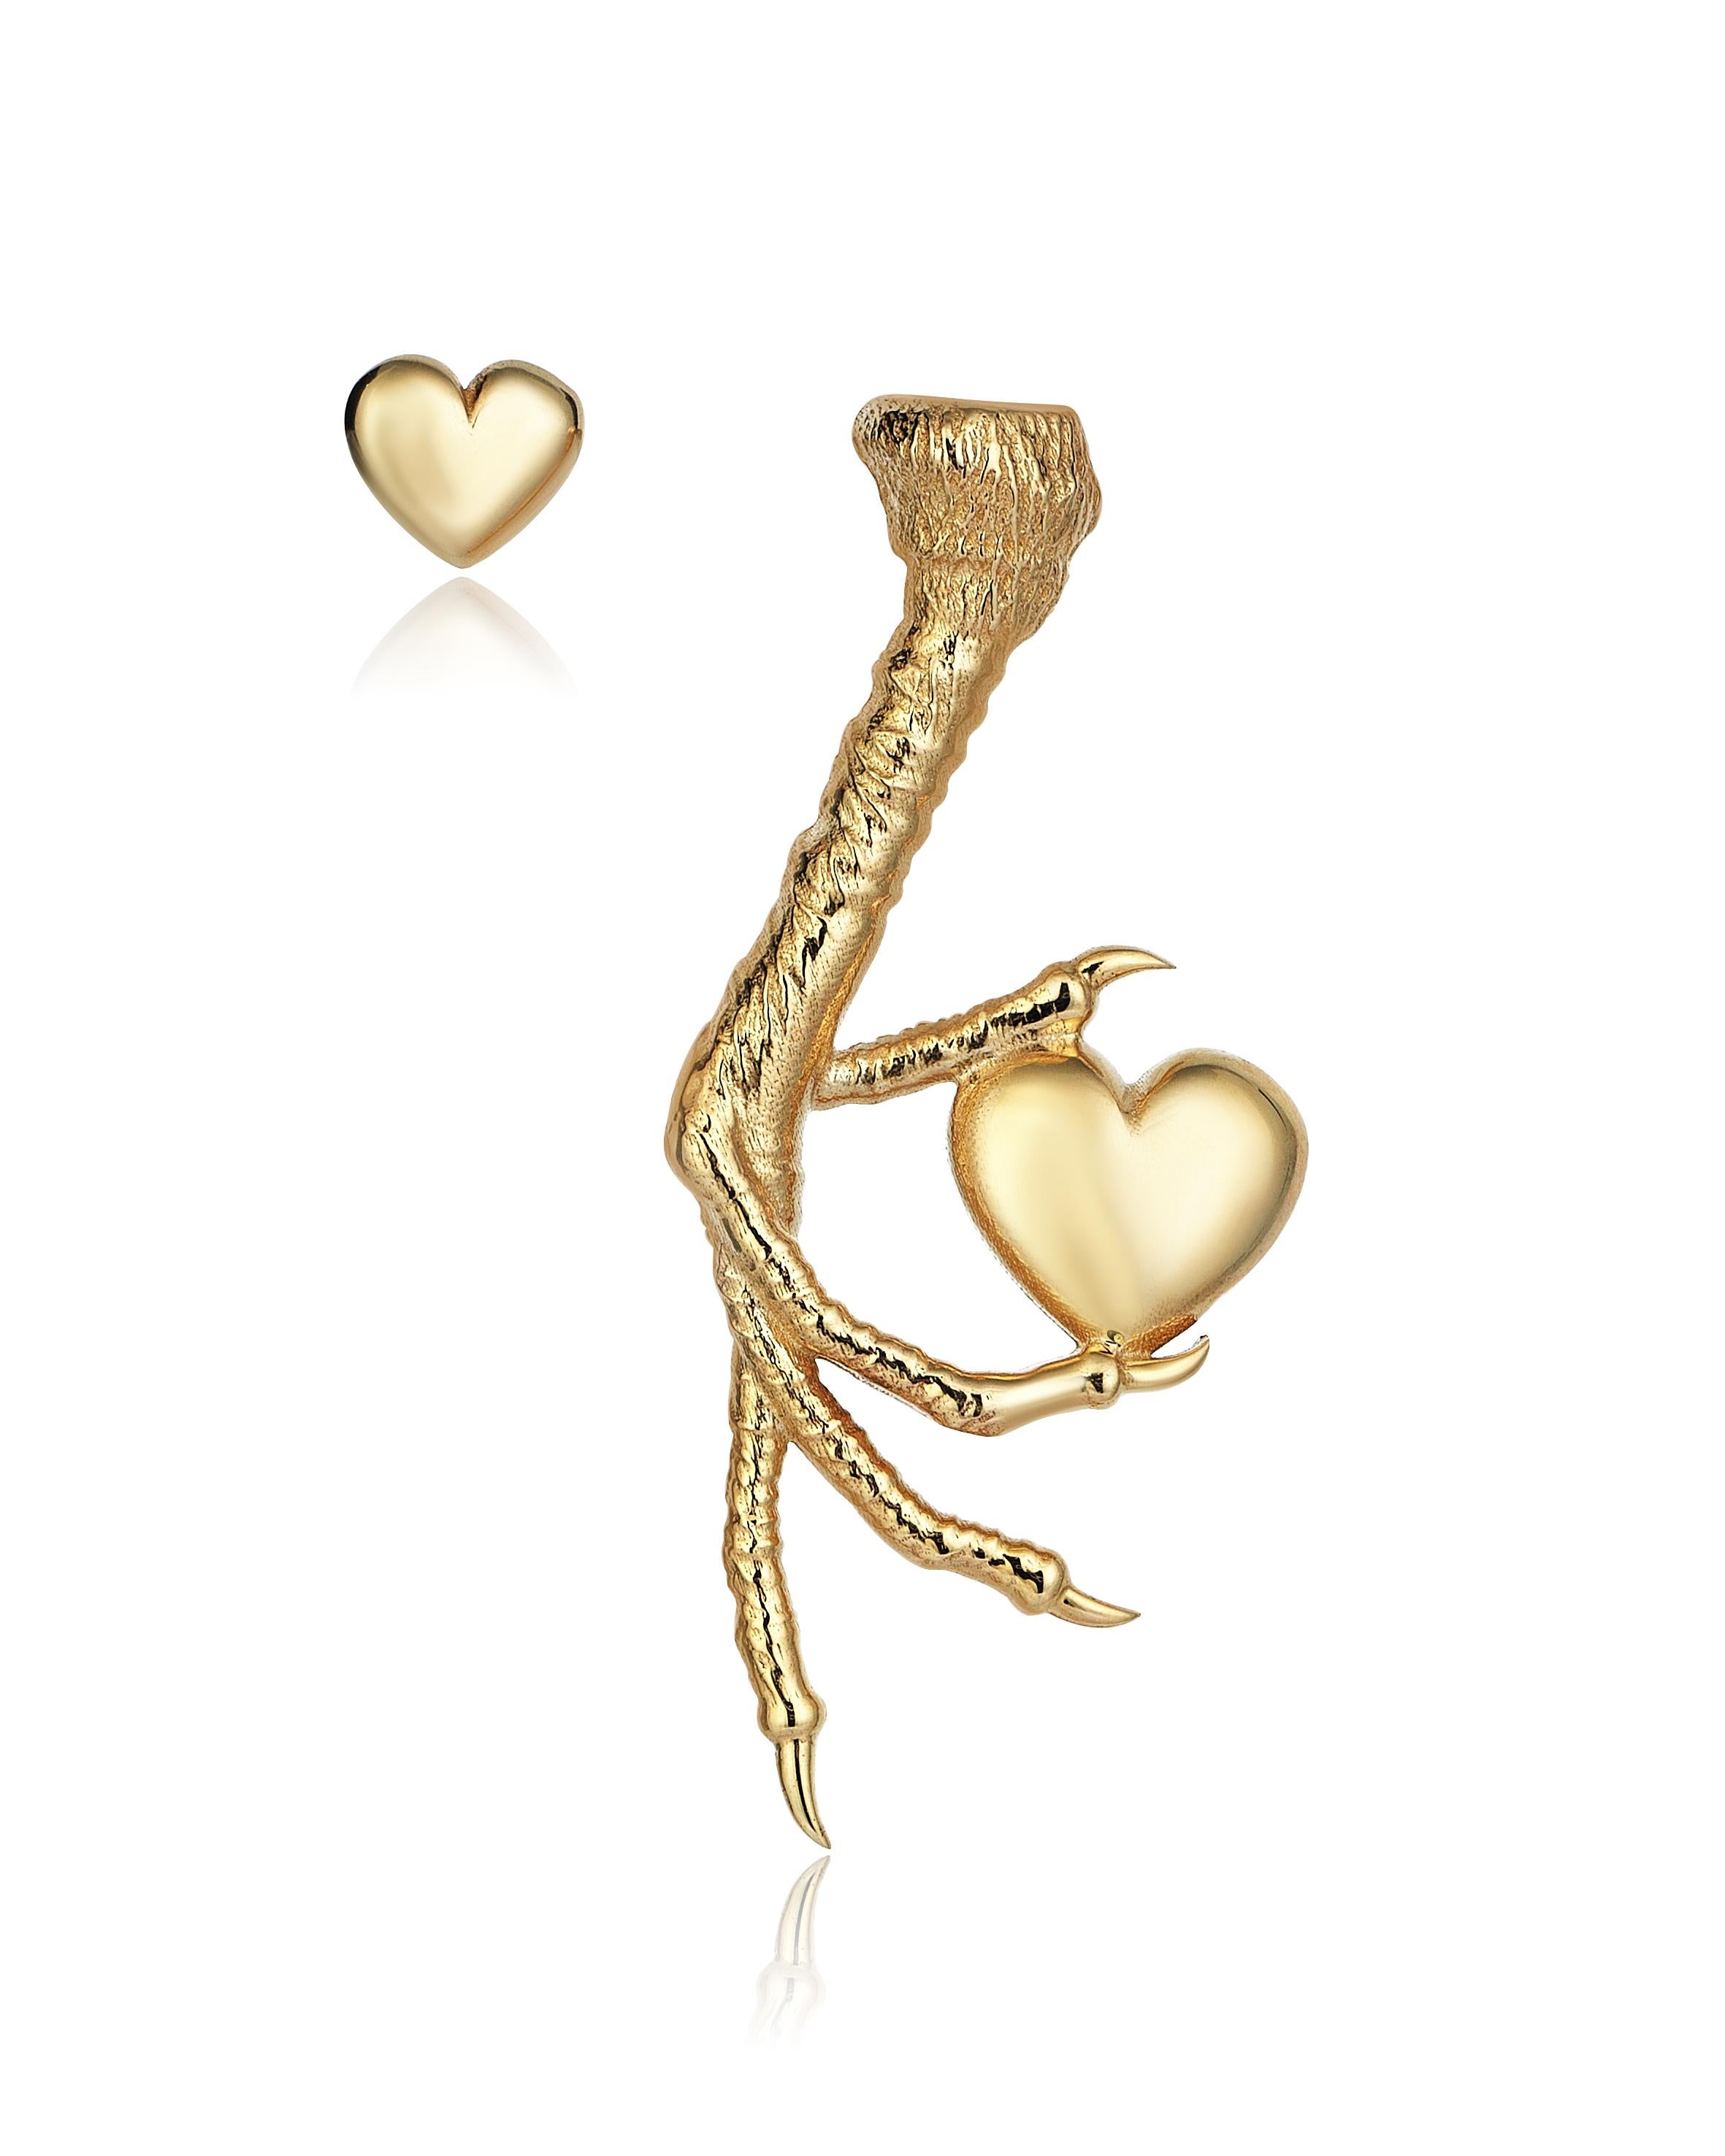 Claw’s Love Earrings In New Condition For Sale In New York, NY